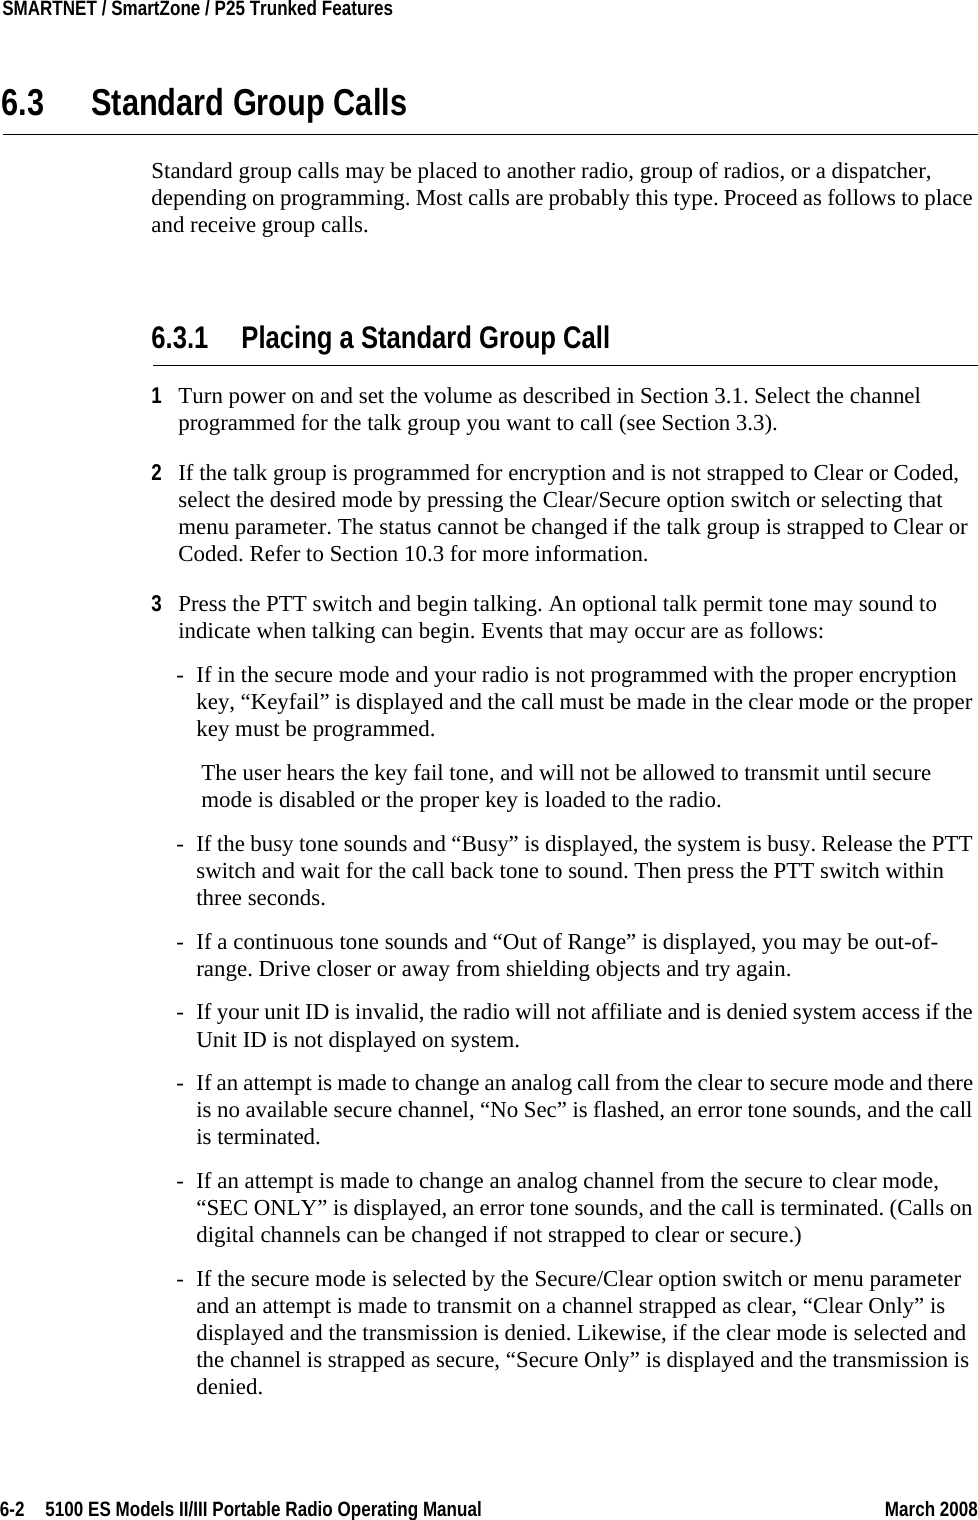 6-2  5100 ES Models II/III Portable Radio Operating Manual March 2008SMARTNET / SmartZone / P25 Trunked Features 6.3 Standard Group CallsStandard group calls may be placed to another radio, group of radios, or a dispatcher, depending on programming. Most calls are probably this type. Proceed as follows to place and receive group calls.6.3.1 Placing a Standard Group Call1Turn power on and set the volume as described in Section 3.1. Select the channel programmed for the talk group you want to call (see Section 3.3).2If the talk group is programmed for encryption and is not strapped to Clear or Coded, select the desired mode by pressing the Clear/Secure option switch or selecting that menu parameter. The status cannot be changed if the talk group is strapped to Clear or Coded. Refer to Section 10.3 for more information.3Press the PTT switch and begin talking. An optional talk permit tone may sound to indicate when talking can begin. Events that may occur are as follows:- If in the secure mode and your radio is not programmed with the proper encryption key, “Keyfail” is displayed and the call must be made in the clear mode or the proper key must be programmed.The user hears the key fail tone, and will not be allowed to transmit until secure mode is disabled or the proper key is loaded to the radio.- If the busy tone sounds and “Busy” is displayed, the system is busy. Release the PTT switch and wait for the call back tone to sound. Then press the PTT switch within three seconds.- If a continuous tone sounds and “Out of Range” is displayed, you may be out-of-range. Drive closer or away from shielding objects and try again.- If your unit ID is invalid, the radio will not affiliate and is denied system access if the Unit ID is not displayed on system.- If an attempt is made to change an analog call from the clear to secure mode and there is no available secure channel, “No Sec” is flashed, an error tone sounds, and the call is terminated.- If an attempt is made to change an analog channel from the secure to clear mode, “SEC ONLY” is displayed, an error tone sounds, and the call is terminated. (Calls on digital channels can be changed if not strapped to clear or secure.)- If the secure mode is selected by the Secure/Clear option switch or menu parameter and an attempt is made to transmit on a channel strapped as clear, “Clear Only” is displayed and the transmission is denied. Likewise, if the clear mode is selected and the channel is strapped as secure, “Secure Only” is displayed and the transmission is denied.